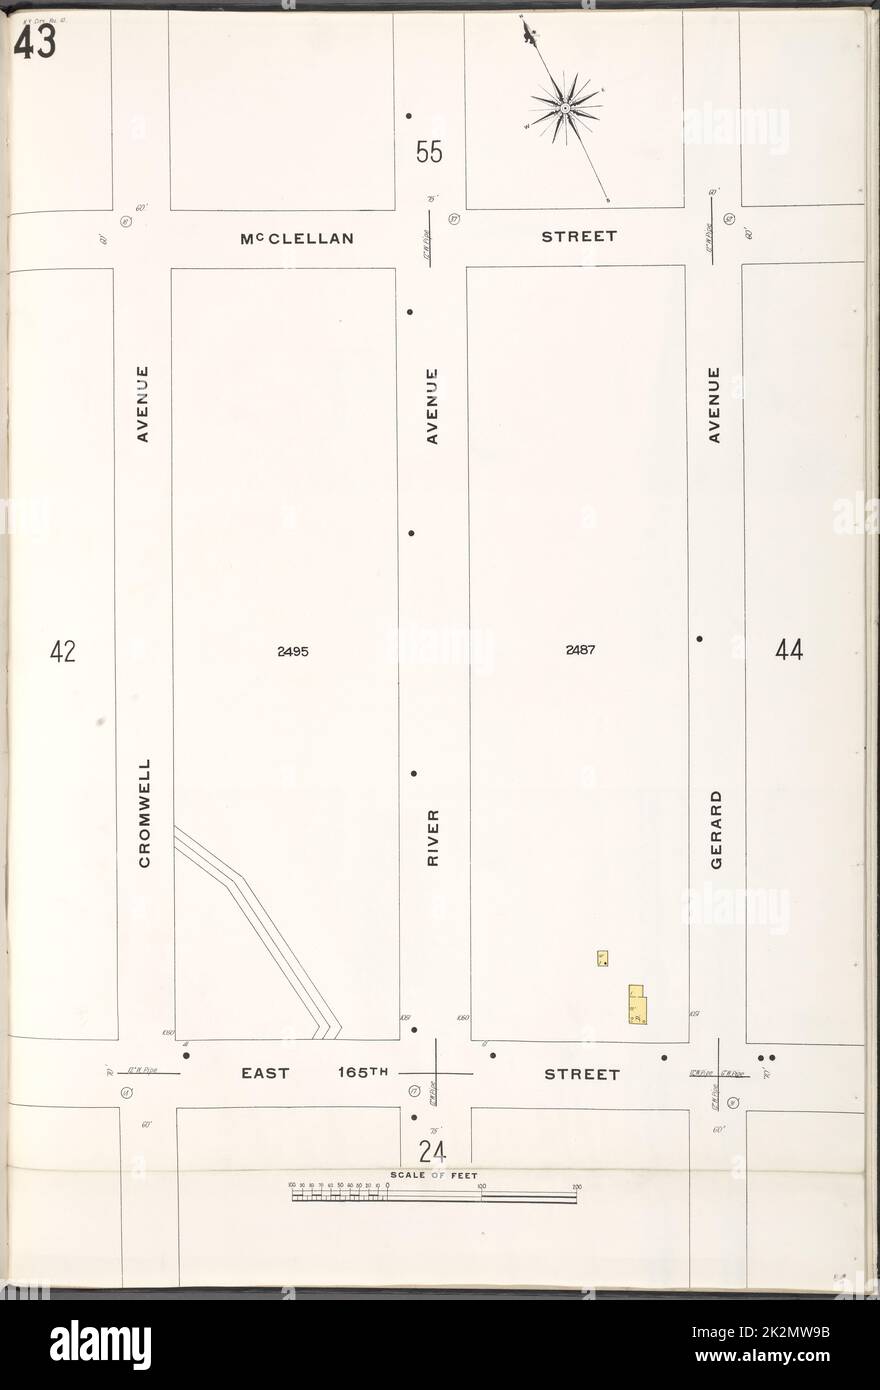 Cartographic, Maps. 1909. Lionel Pincus and Princess Firyal Map Division. Fire insurance , New York (State), Real property , New York (State), Cities & towns , New York (State) Bronx, V. 10, Plate No. 43 Map bounded by McClellan St., Gerard Ave., E. 165th St., Cromwell Ave. Stock Photo